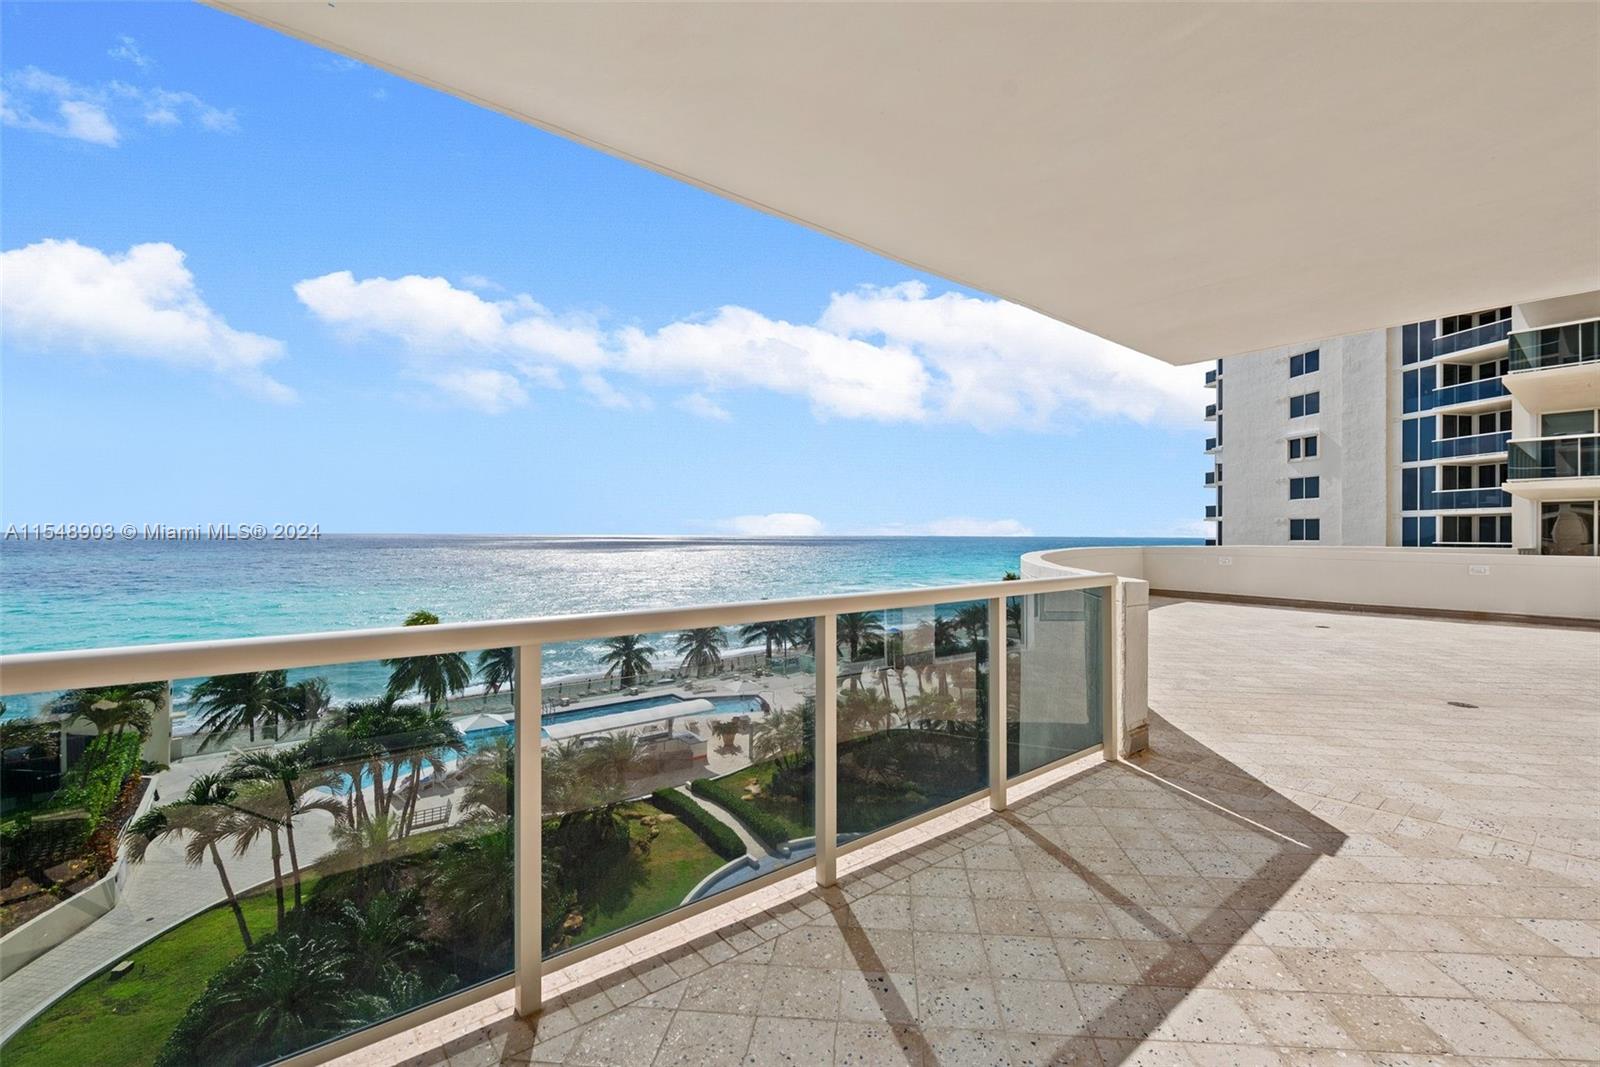 DESIRABLE "04" LINE LANAI IN THE OCEAN TWO CONDO IN SUNNY ISLES. MAGNIFICENT 3BR/4.5BA UNIT OFFERING 2440 sq ft INTERIOR PLUS 600 sq ft BALCONIES. DIRECT OCEAN VIEWS AND CITY VIEWS FROM THIS EAST AND WEST FLOW-THRU UNIT. PRIVATE ELEVATOR. LAUNDRY ROOM. TWO TENNIS COURTS, RESTAURANT, BEACH, POOL SERVICE, TWO STORY GYM w/OCEAN VIEWS, PET FRIENDLY, FULL SERVICE LUXURY.